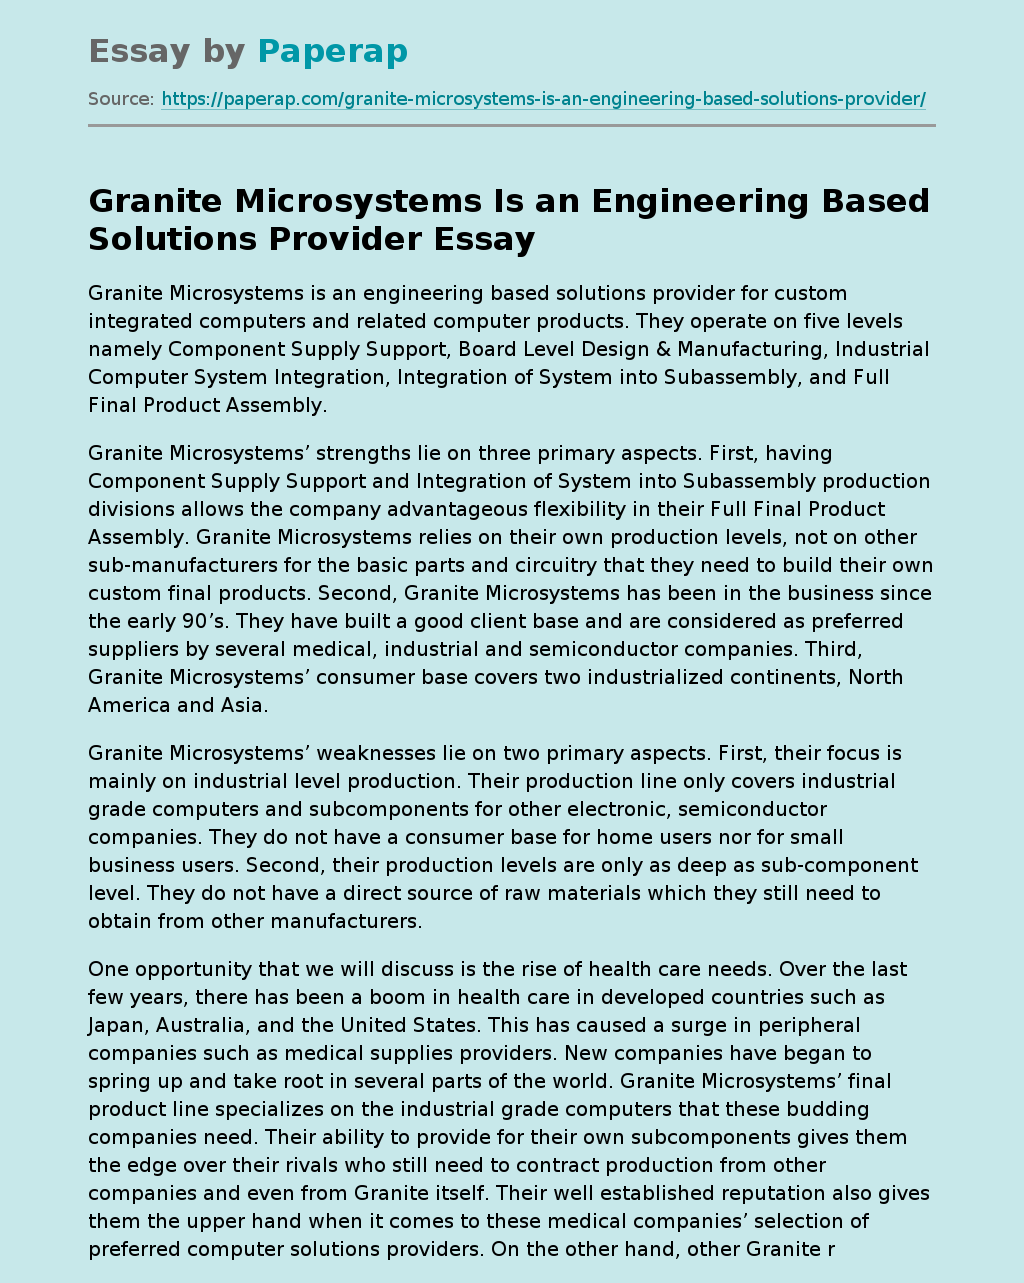 Granite Microsystems Is an Engineering Based Solutions Provider